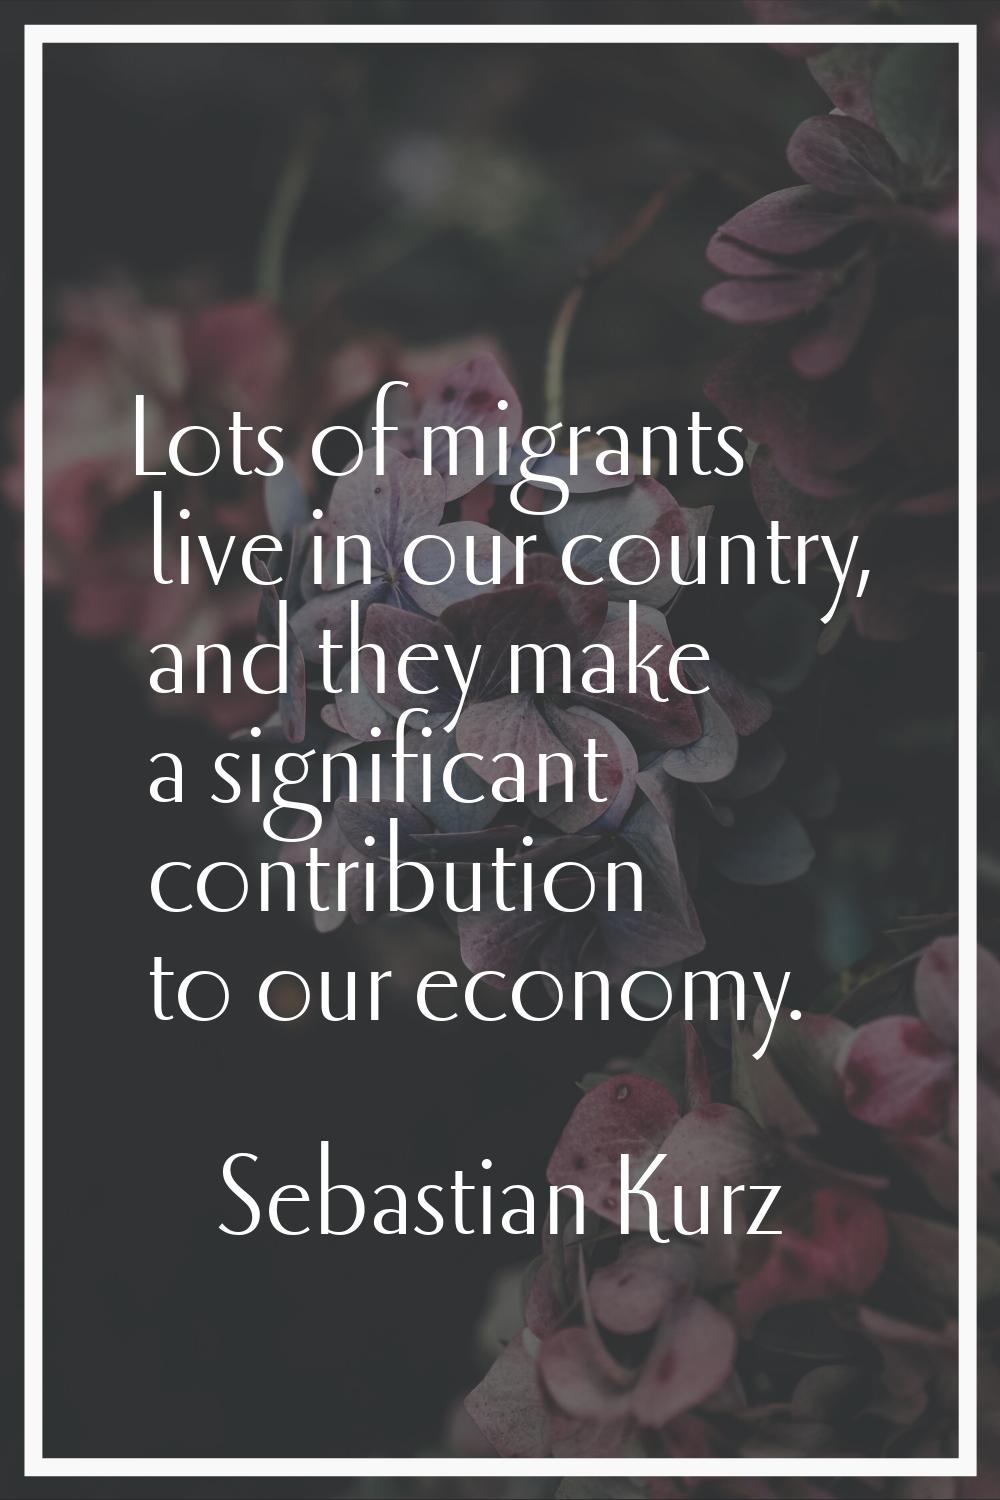 Lots of migrants live in our country, and they make a significant contribution to our economy.